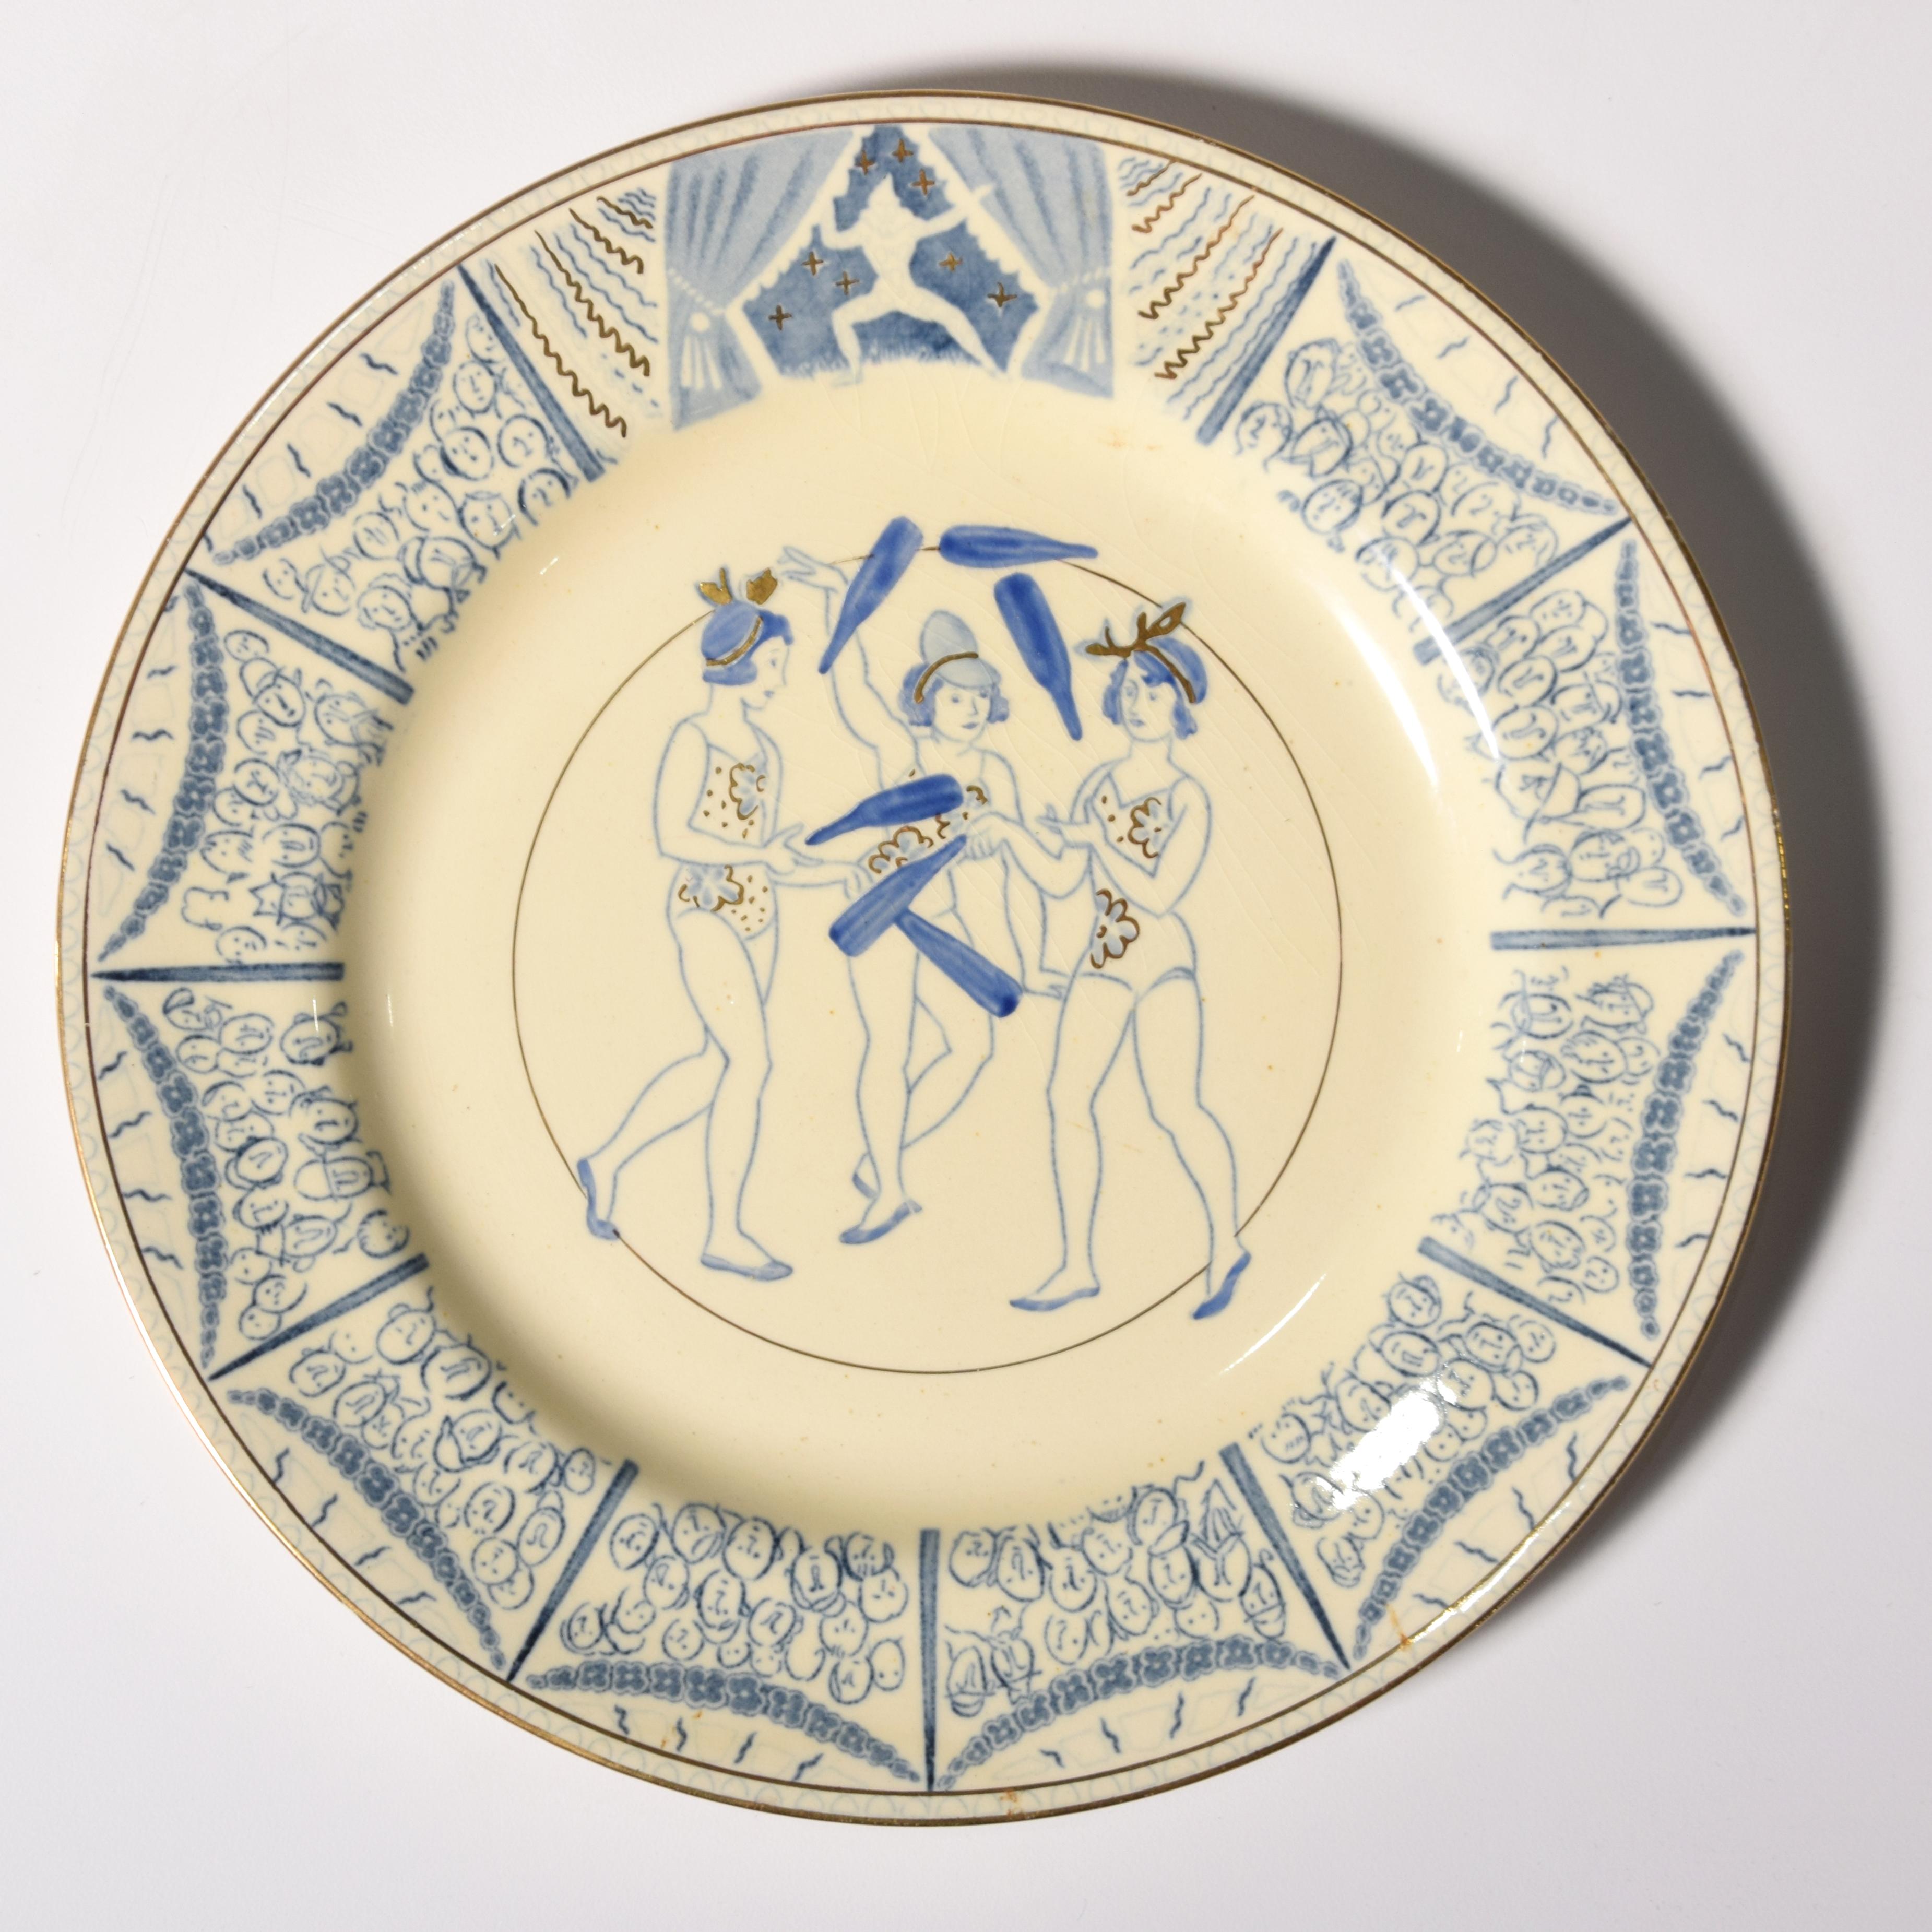 Artist/Designer: Clarice Cliff (British, 1899-1972), Laura Knight (British, 1877-1970); Wilkinson Ltd.

Additional Information: Plates were designed as protoypes for the “Circus” pattern, later painted in various colors. Provenance: Christie’s,